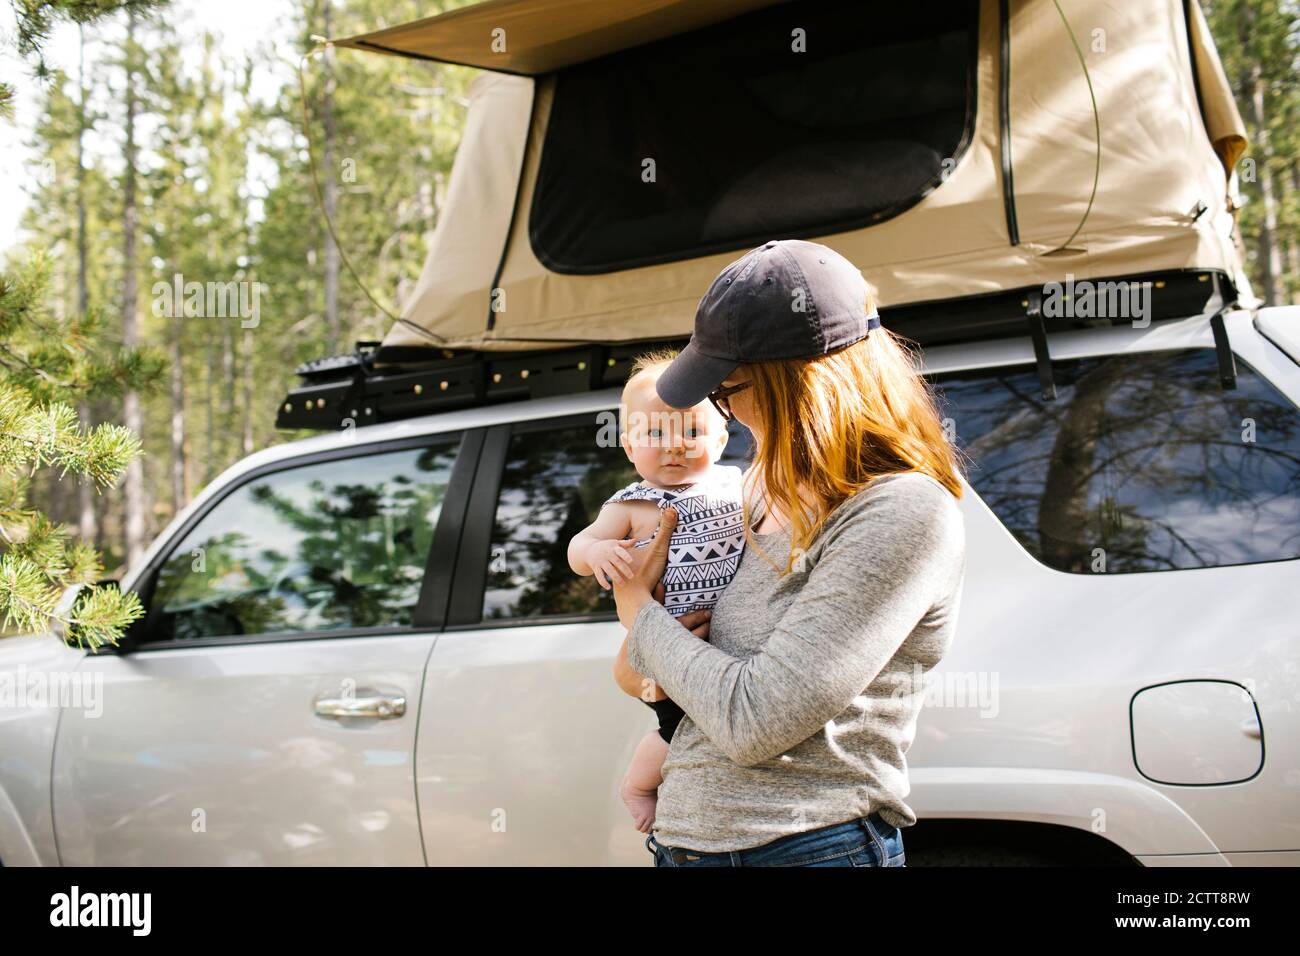 Woman holding baby son (6-11 months) on camping, car with tent in background, Wasatch Cache National Forest Stock Photo